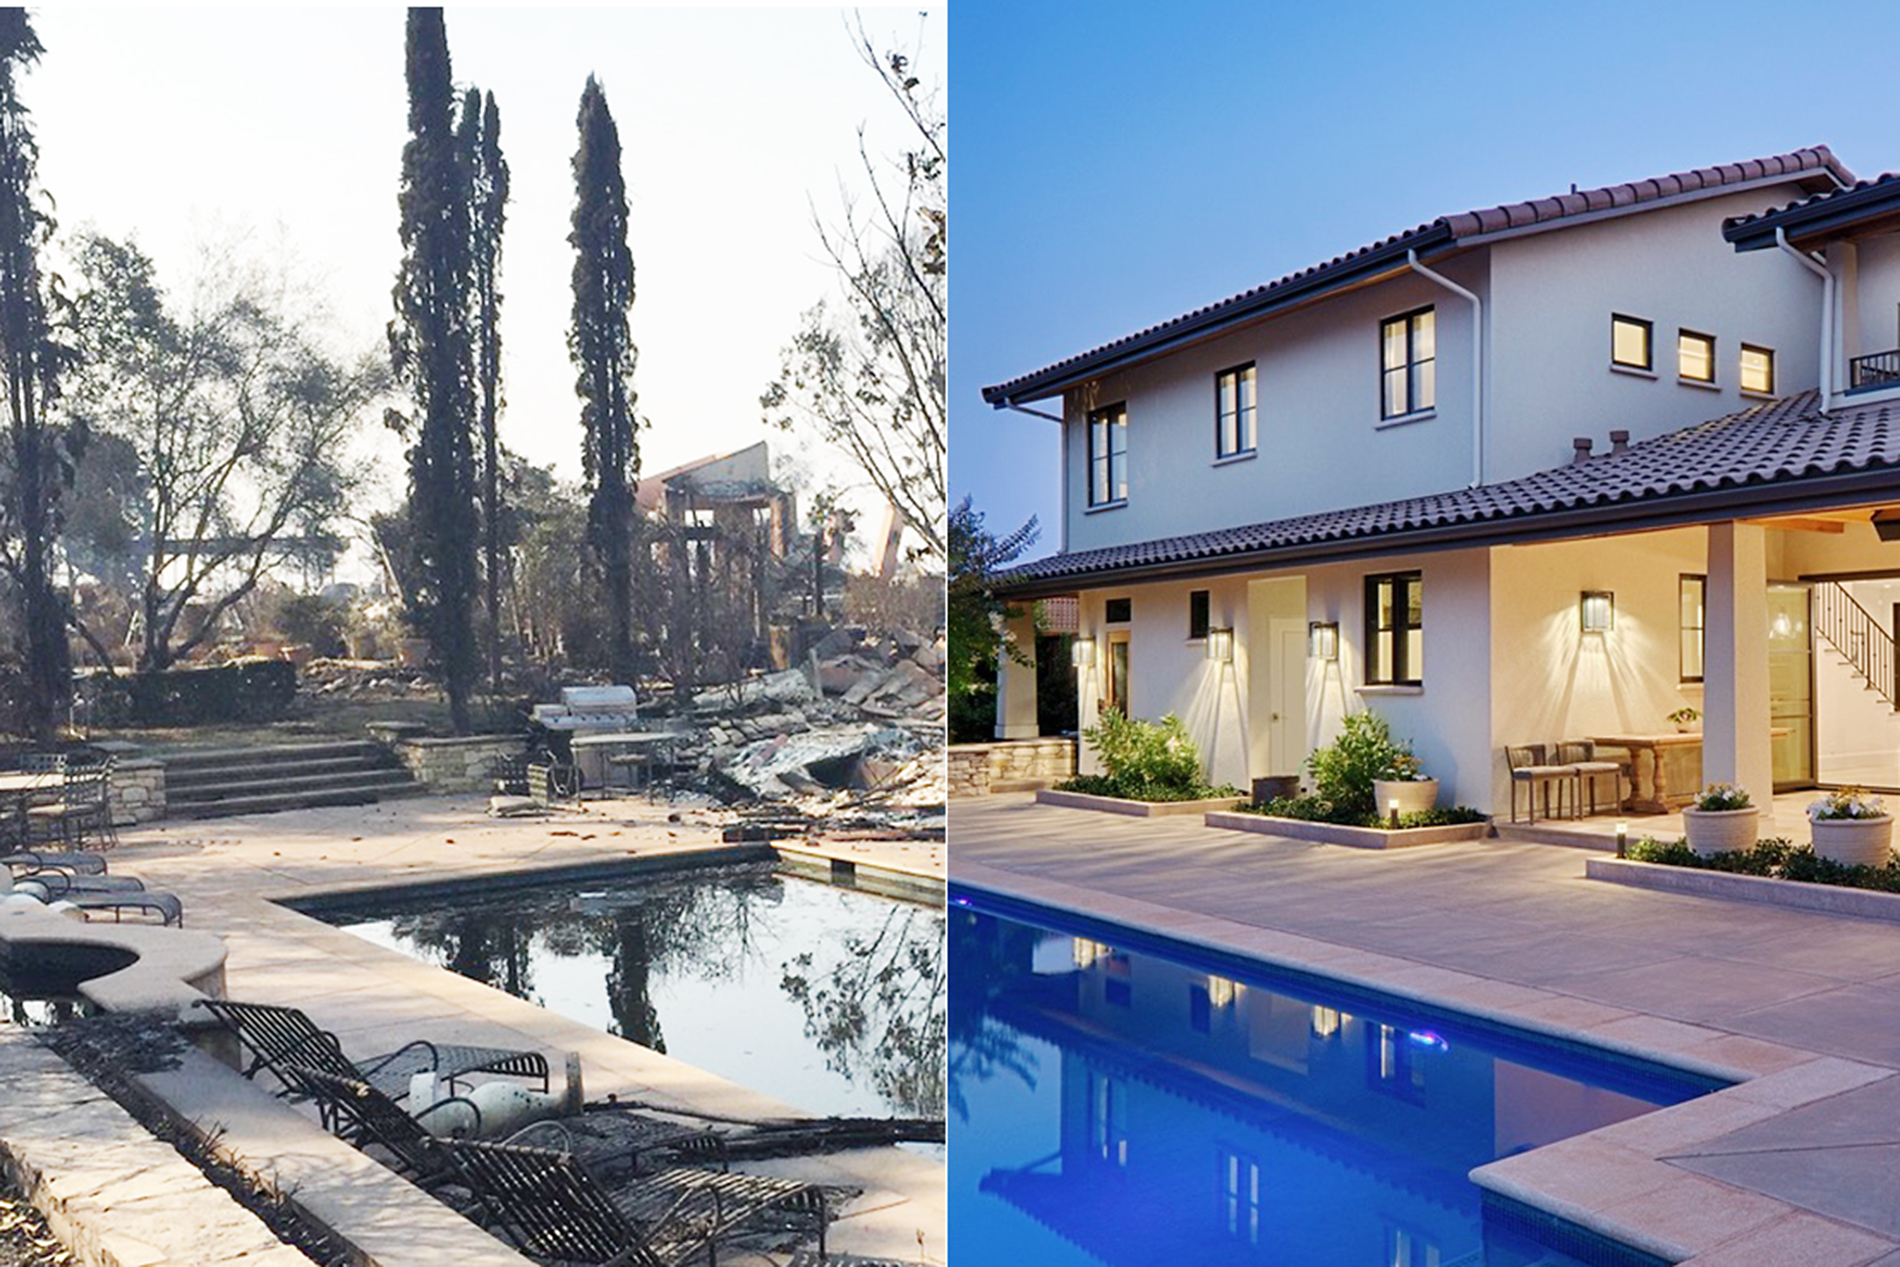 The image shows a before-and-after comparison. On the left, there is a burned-out and damaged yard with a pool. On the right, there is a pristine, well-maintained modern house with a pool.